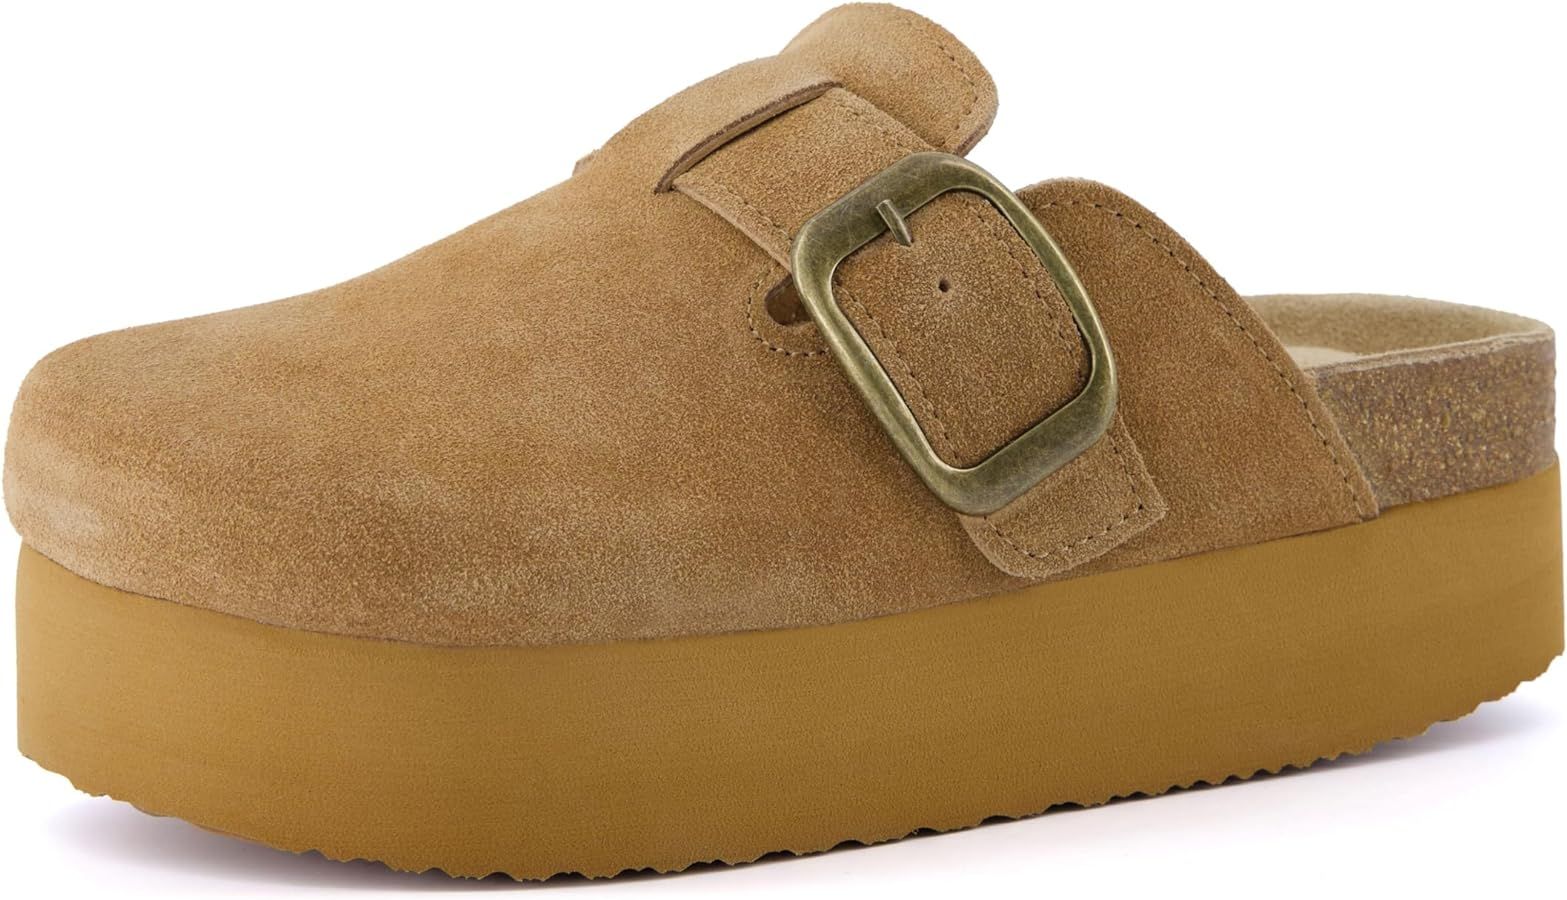 CUSHIONAIRE Women's Granola Genuine Suede Cork Footbed Platform Clog with +Comfort, Wide Widths A... | Amazon (US)